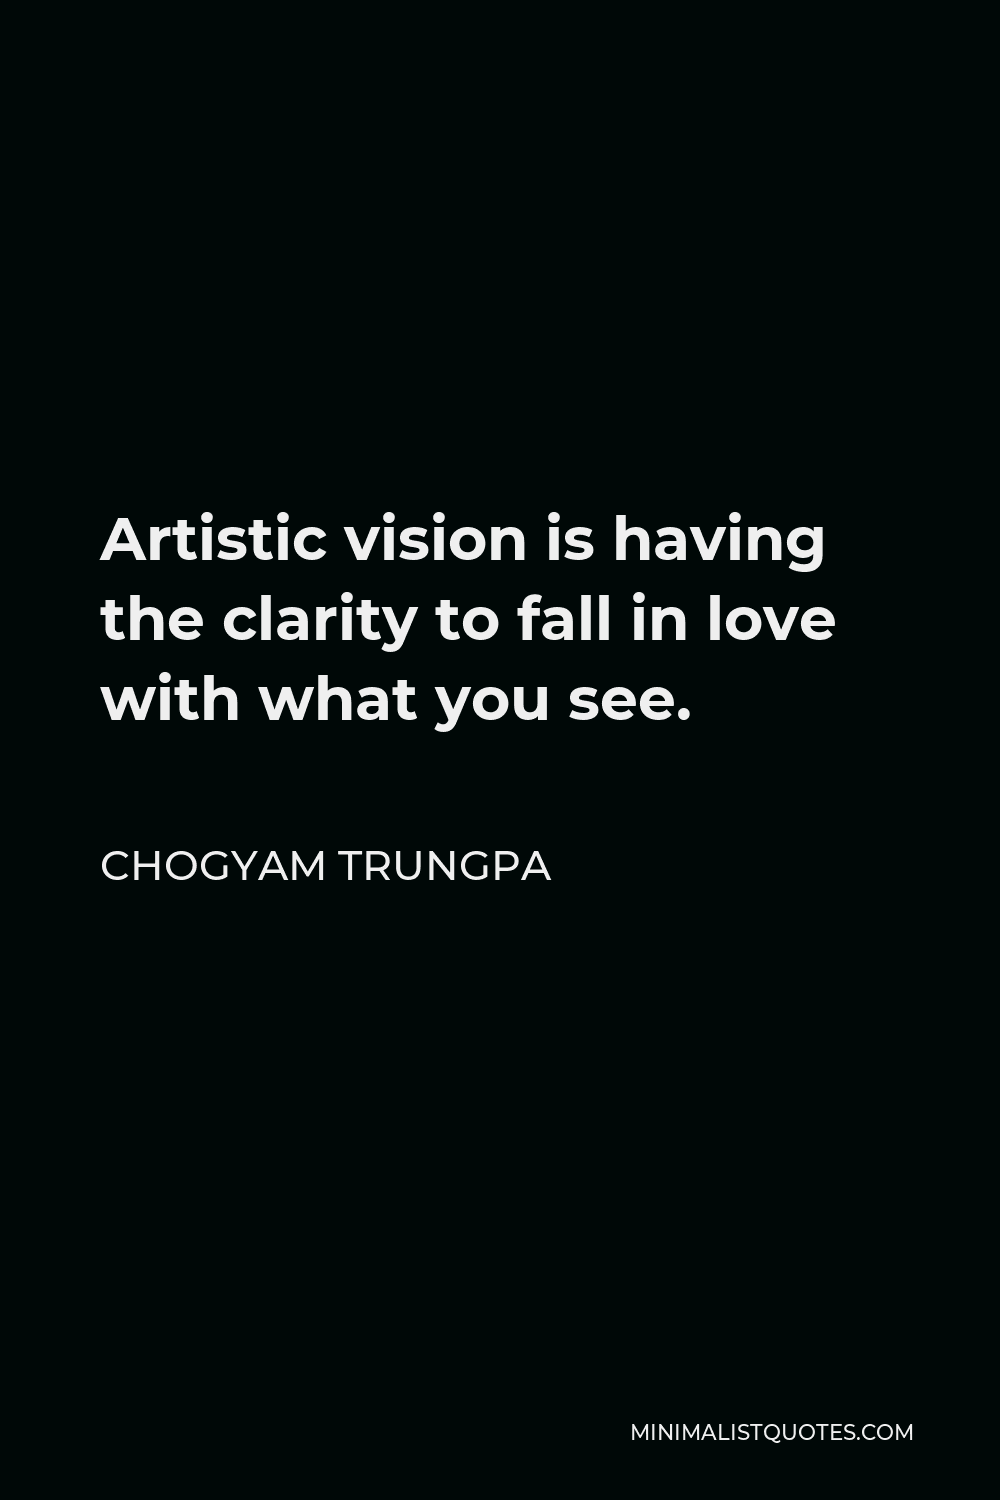 Chogyam Trungpa Quote - Artistic vision is having the clarity to fall in love with what you see.